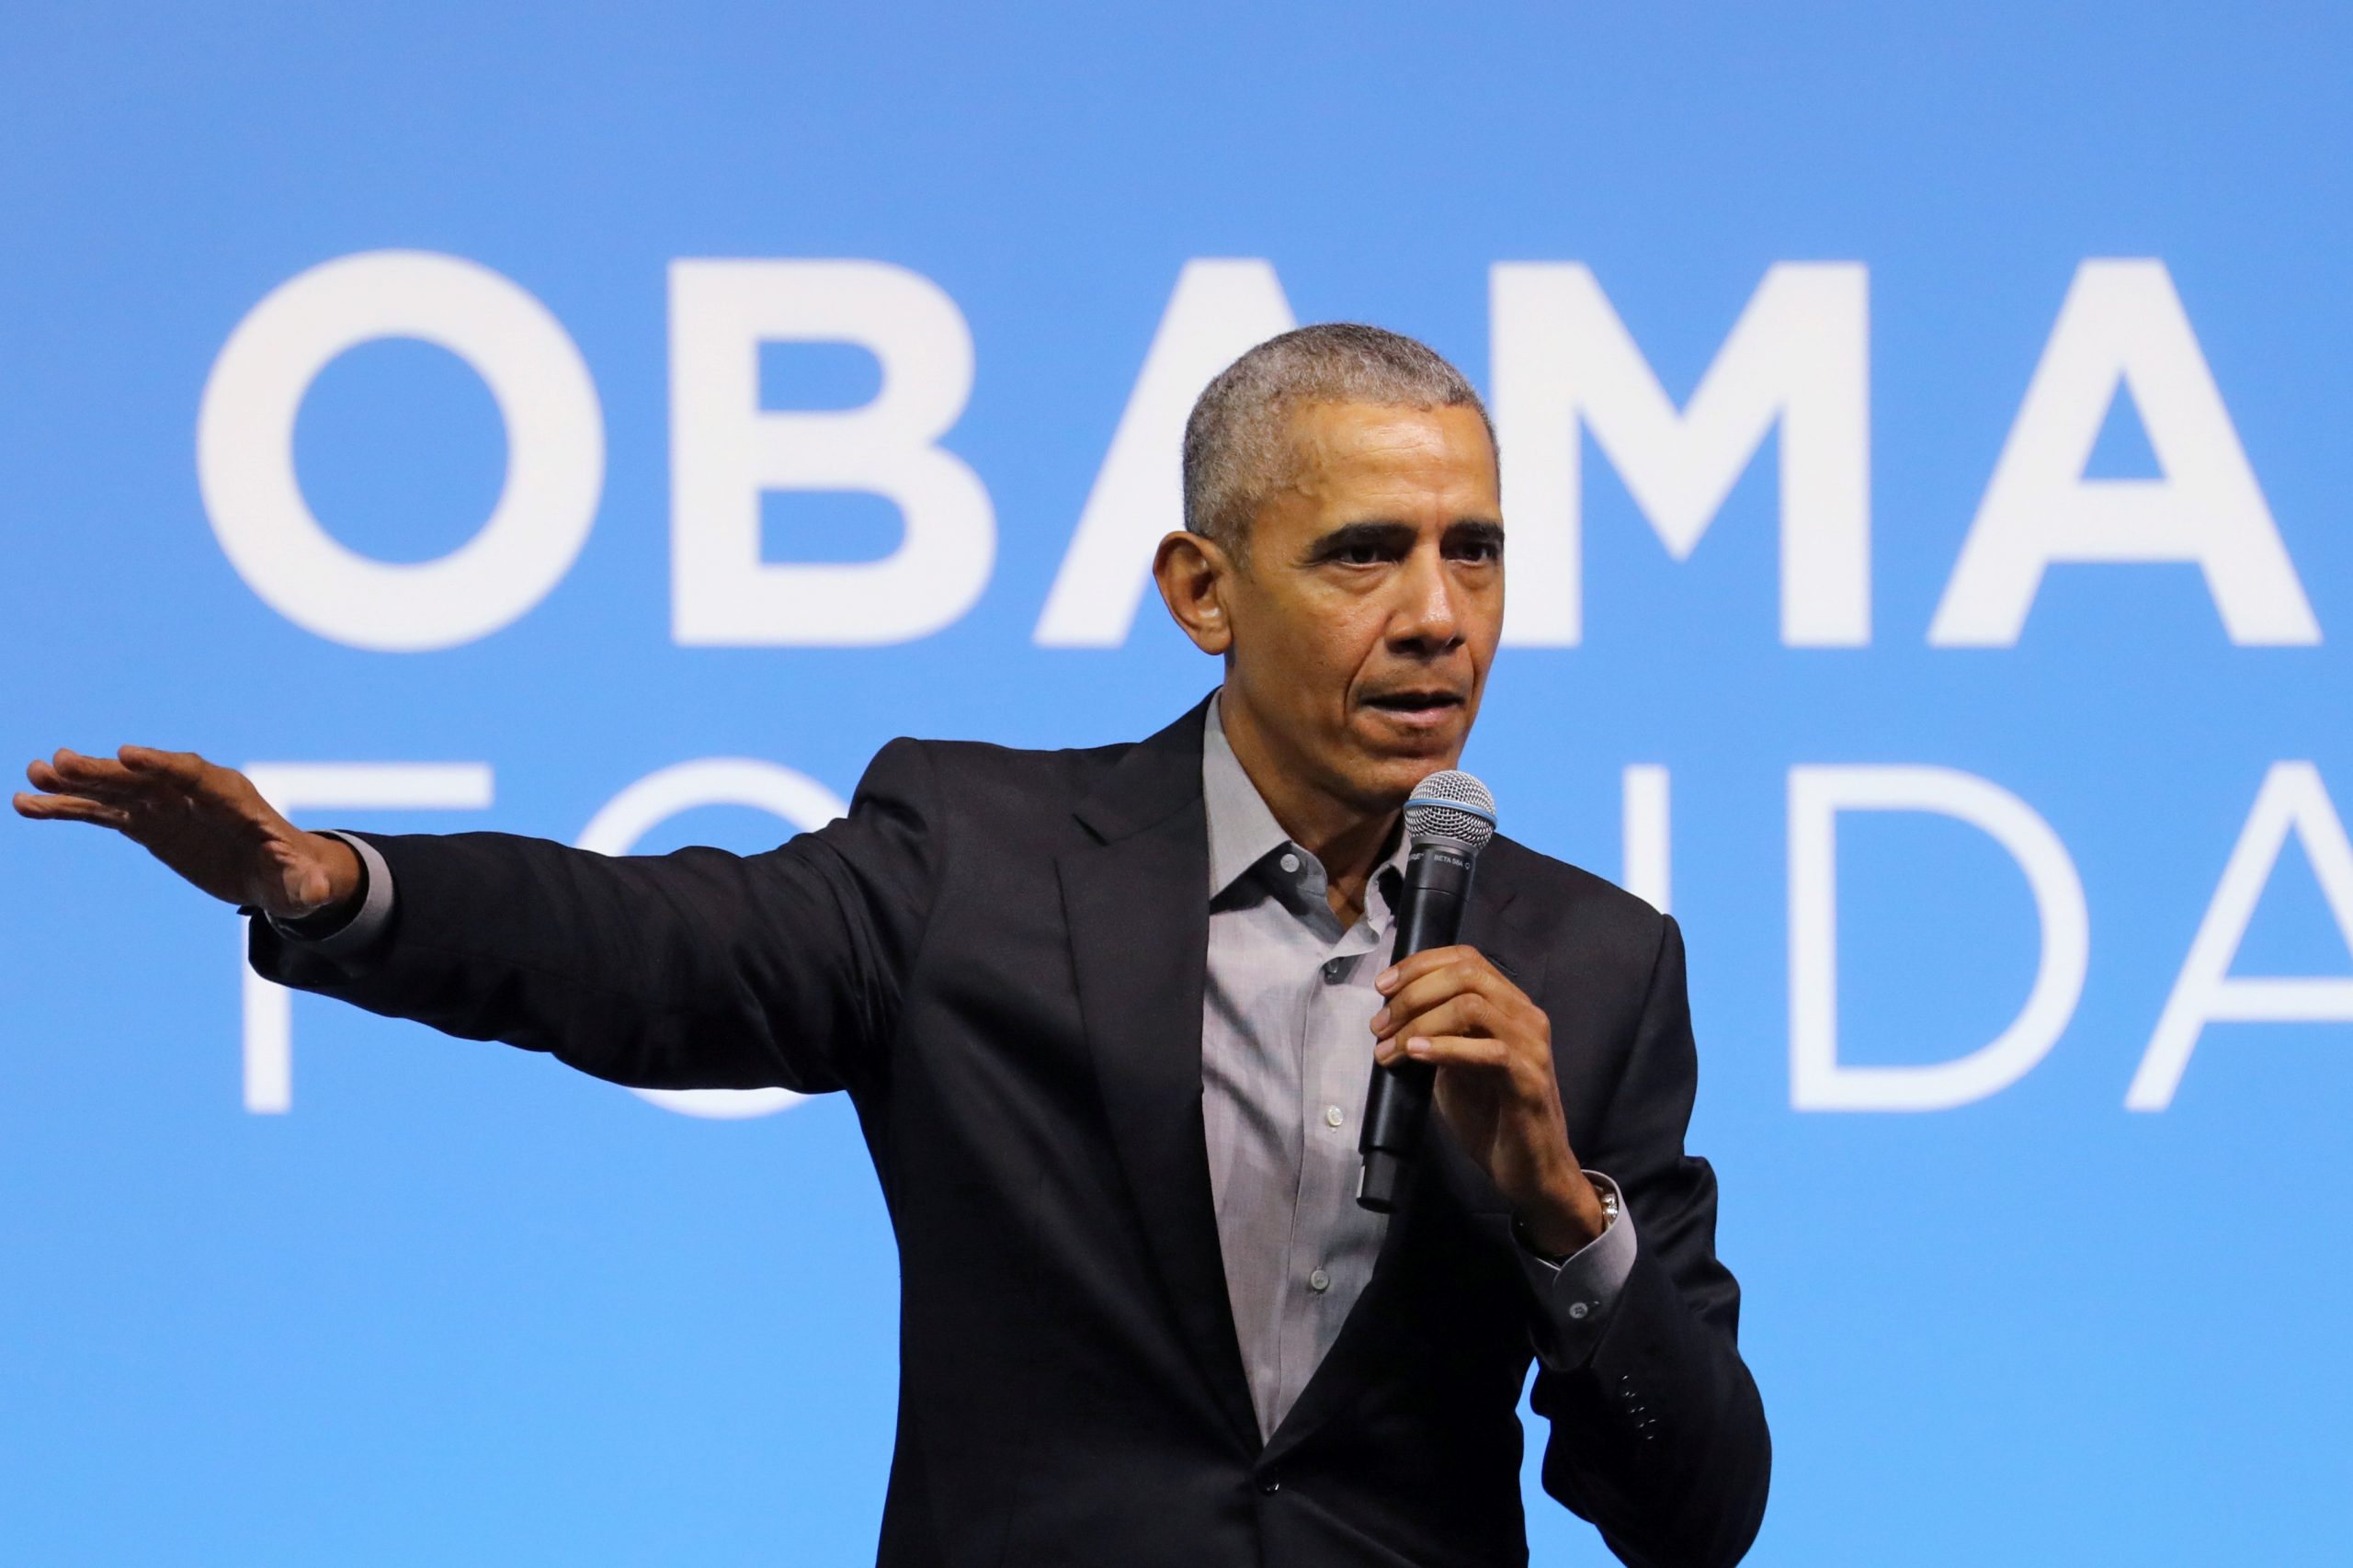 FILE PHOTO: Former U.S. President Barack Obama speaks during an Obama Foundation event in Kuala Lumpur FILE PHOTO: Former U.S. President Barack Obama speaks during an Obama Foundation event in Kuala Lumpur, Malaysia, December 13, 2019. REUTERS/Lim Huey Teng/File Photo Lim Huey Teng